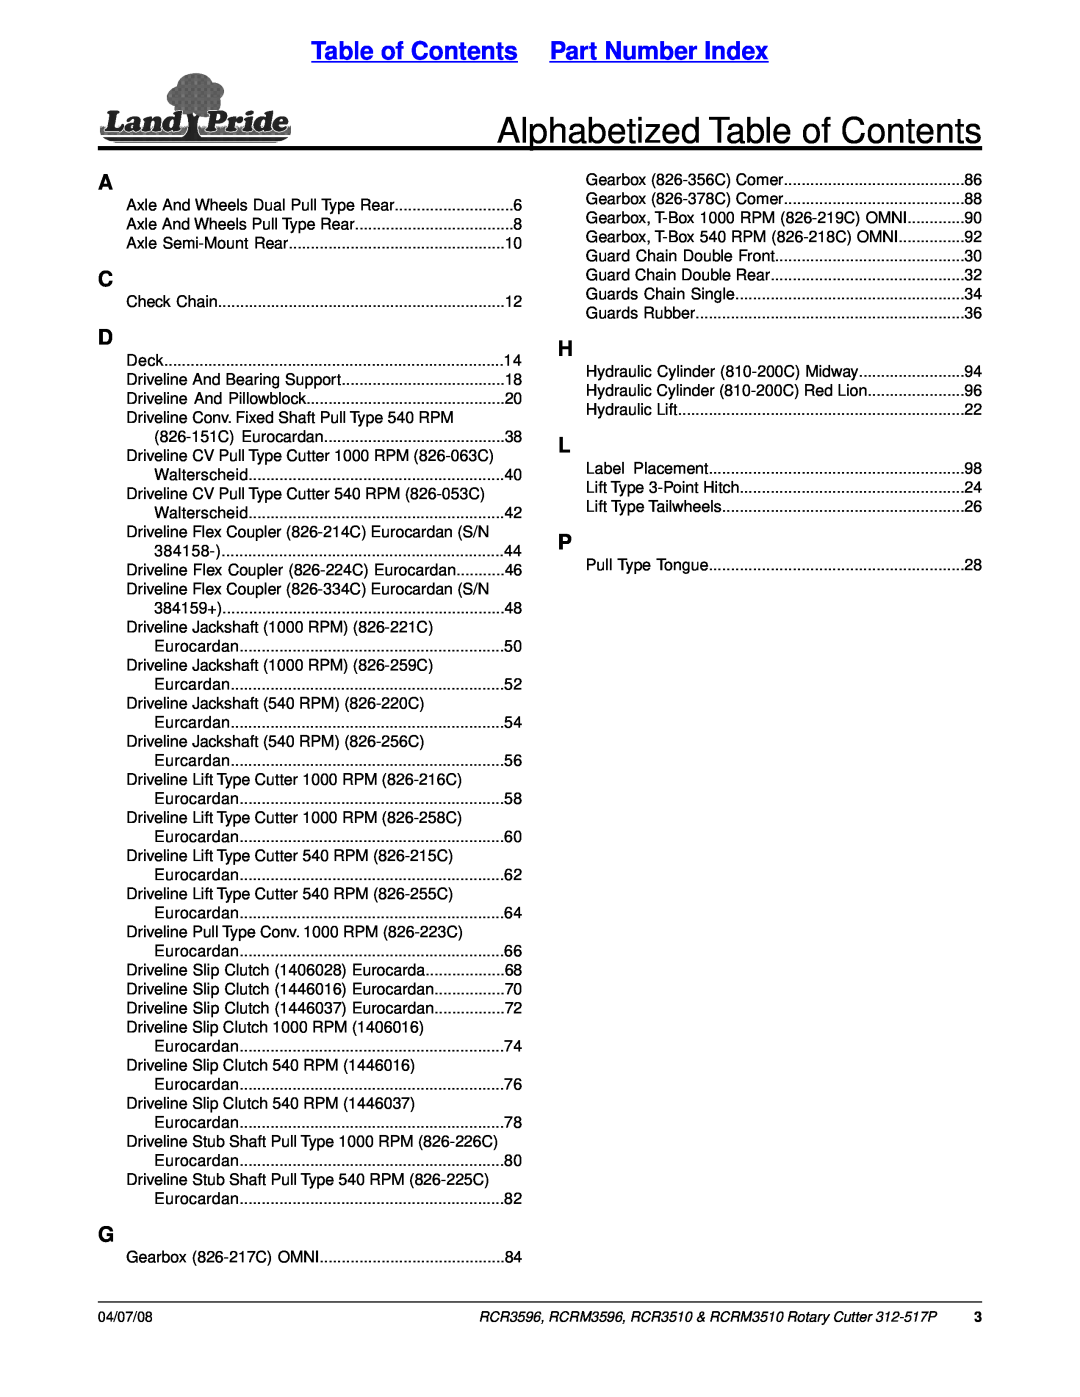 Land Pride RCR3596, RCR3510, RCRM3510, RCRM3596 manual Alphabetized Table of Contents, Table of Contents Part Number Index 